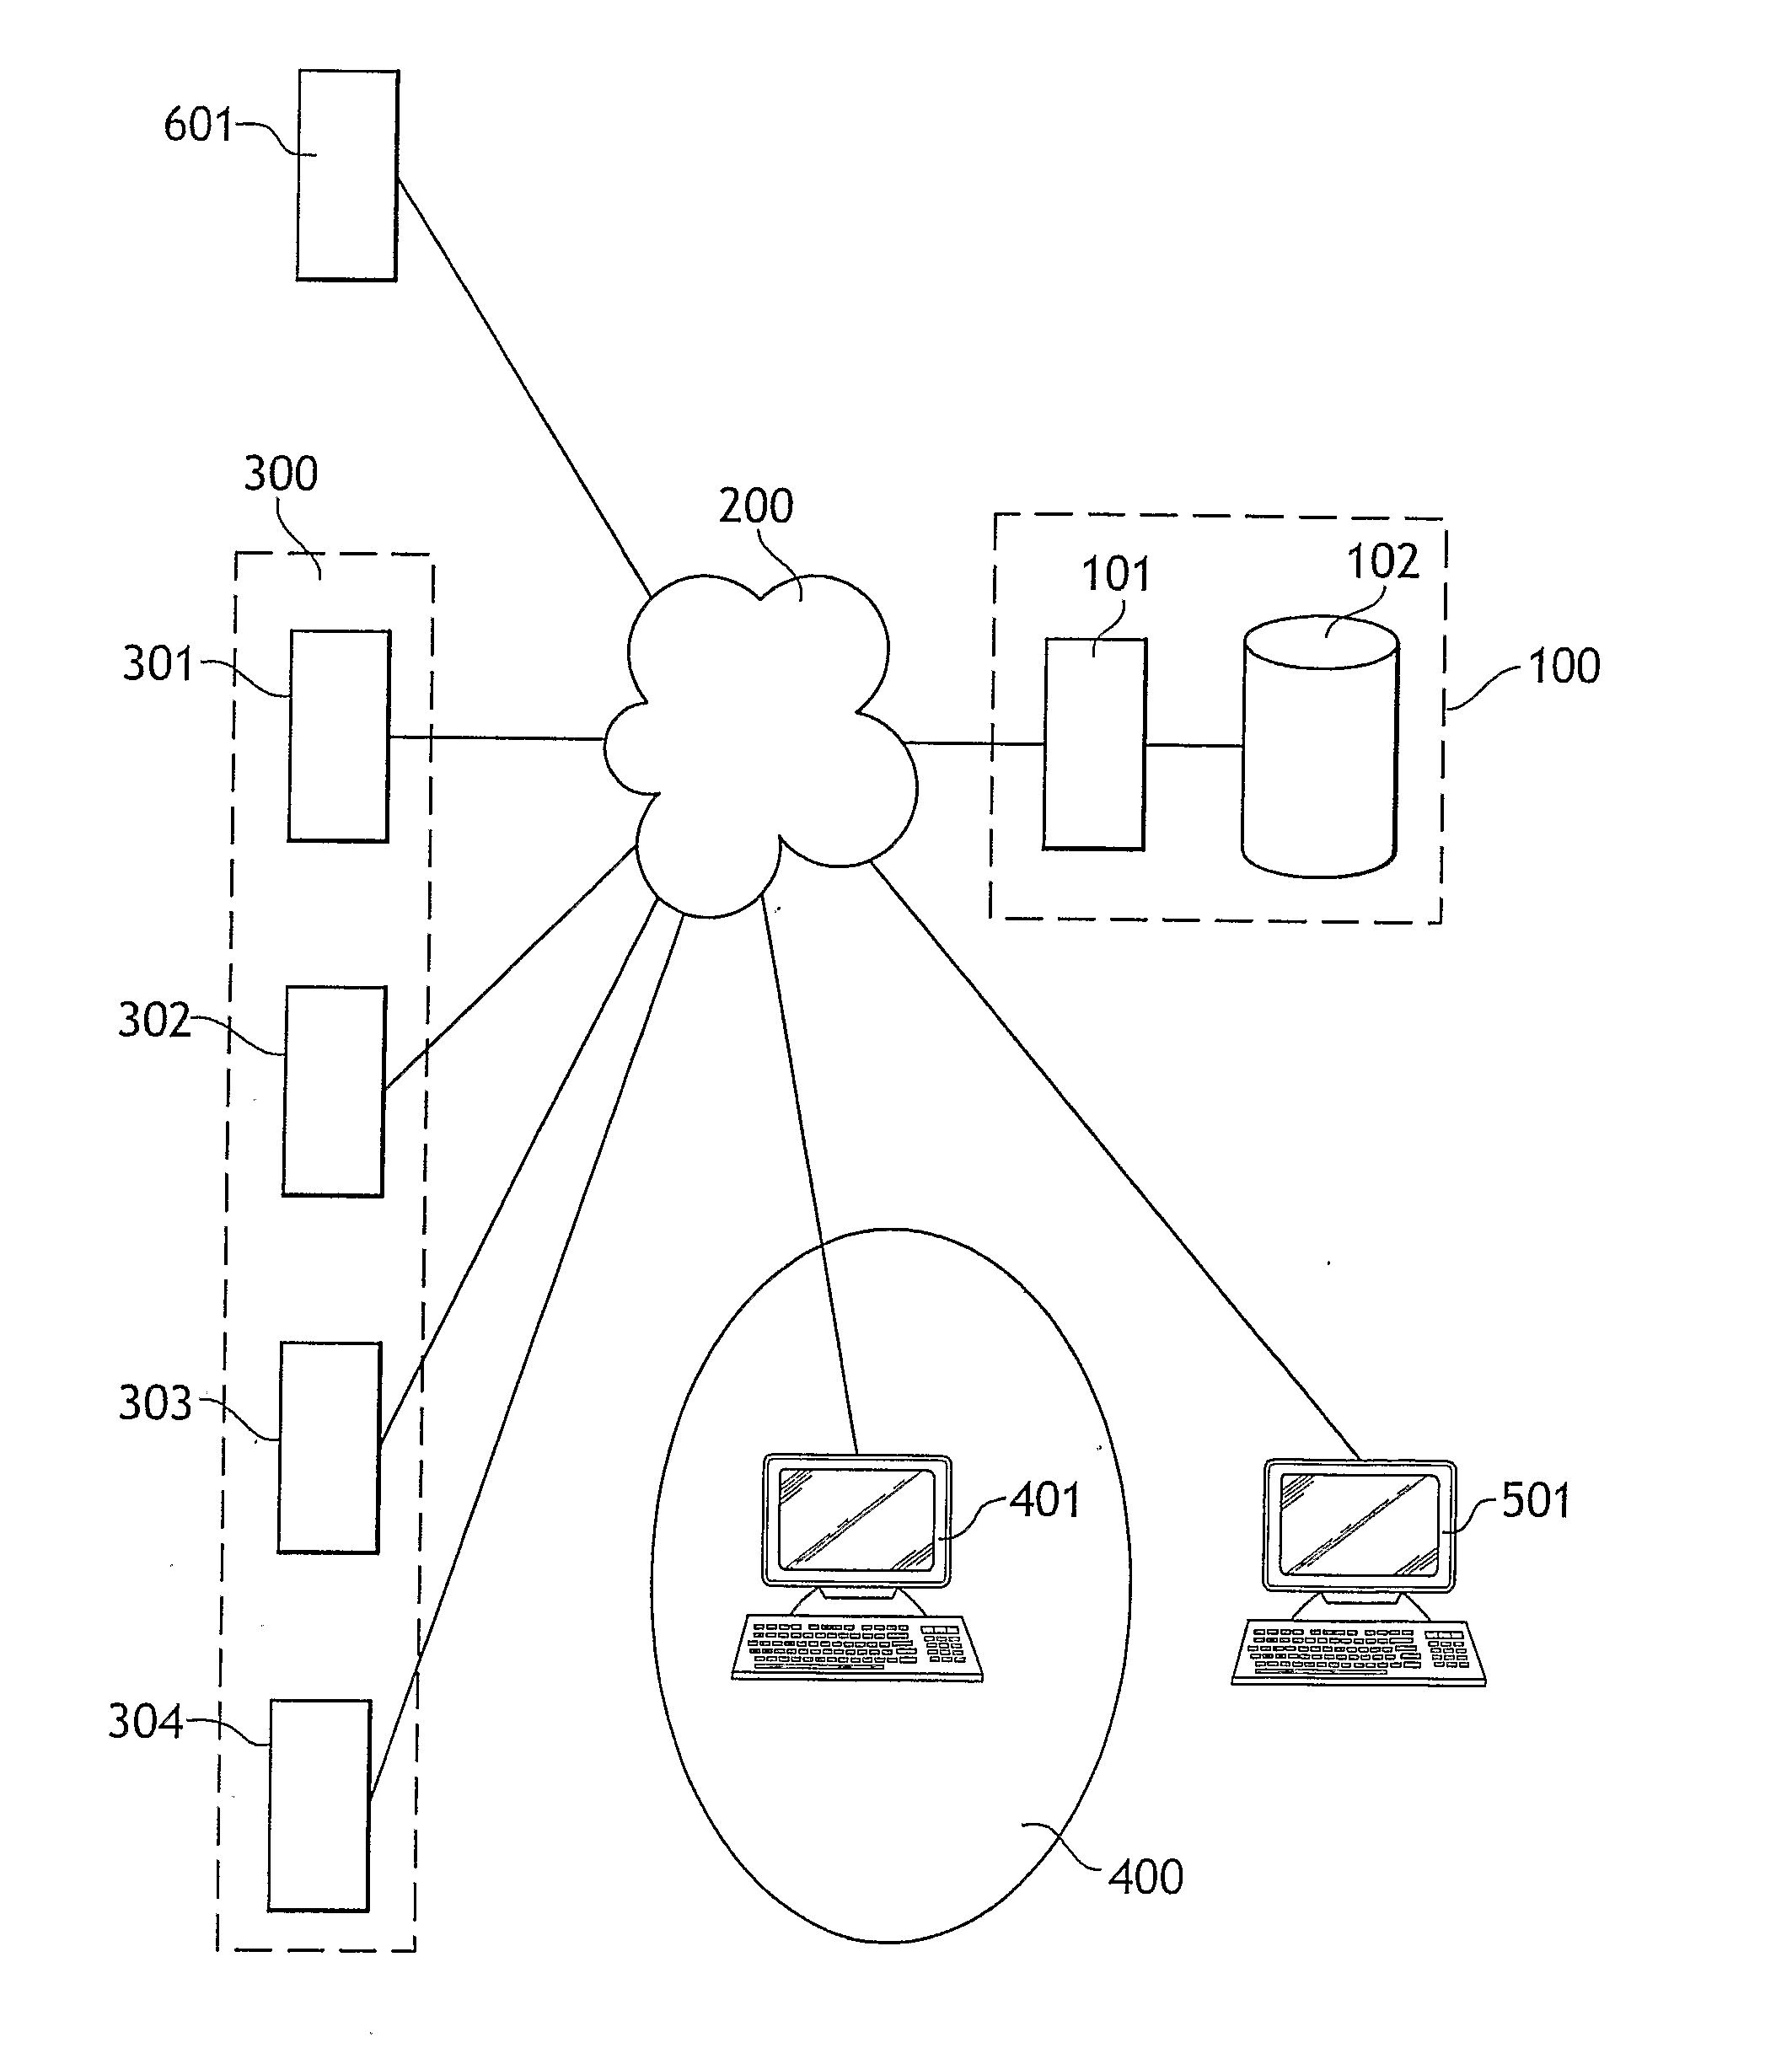 Method for determining a profile of a user of a communication network